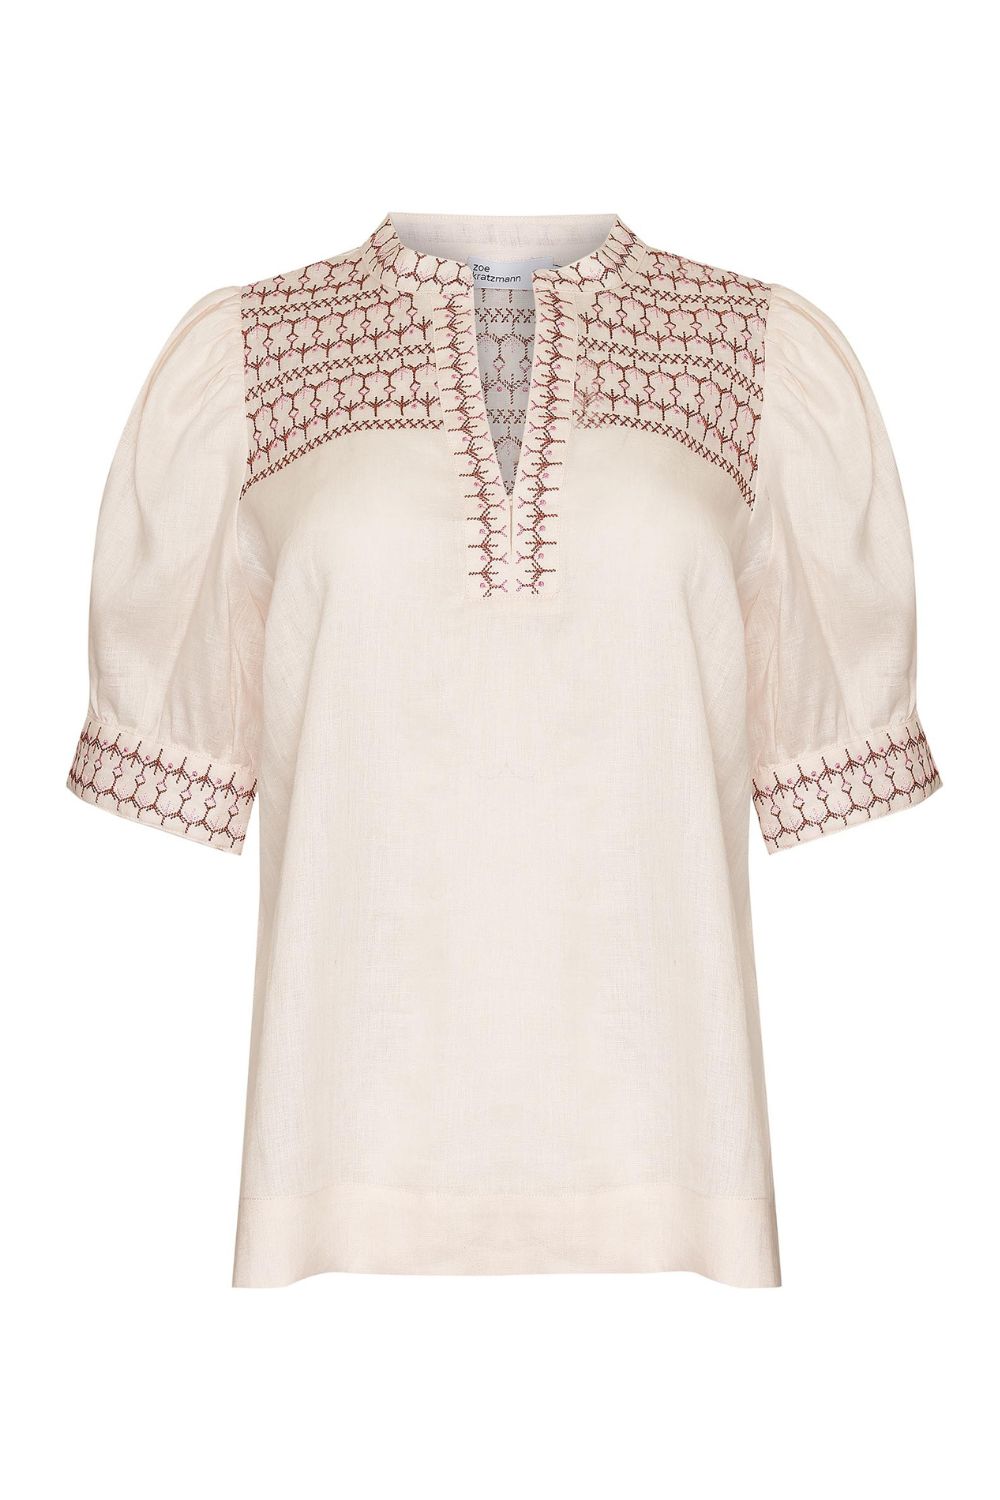 cream, embroidery, mid length sleeve, round neckline, deep v centre, top, product image